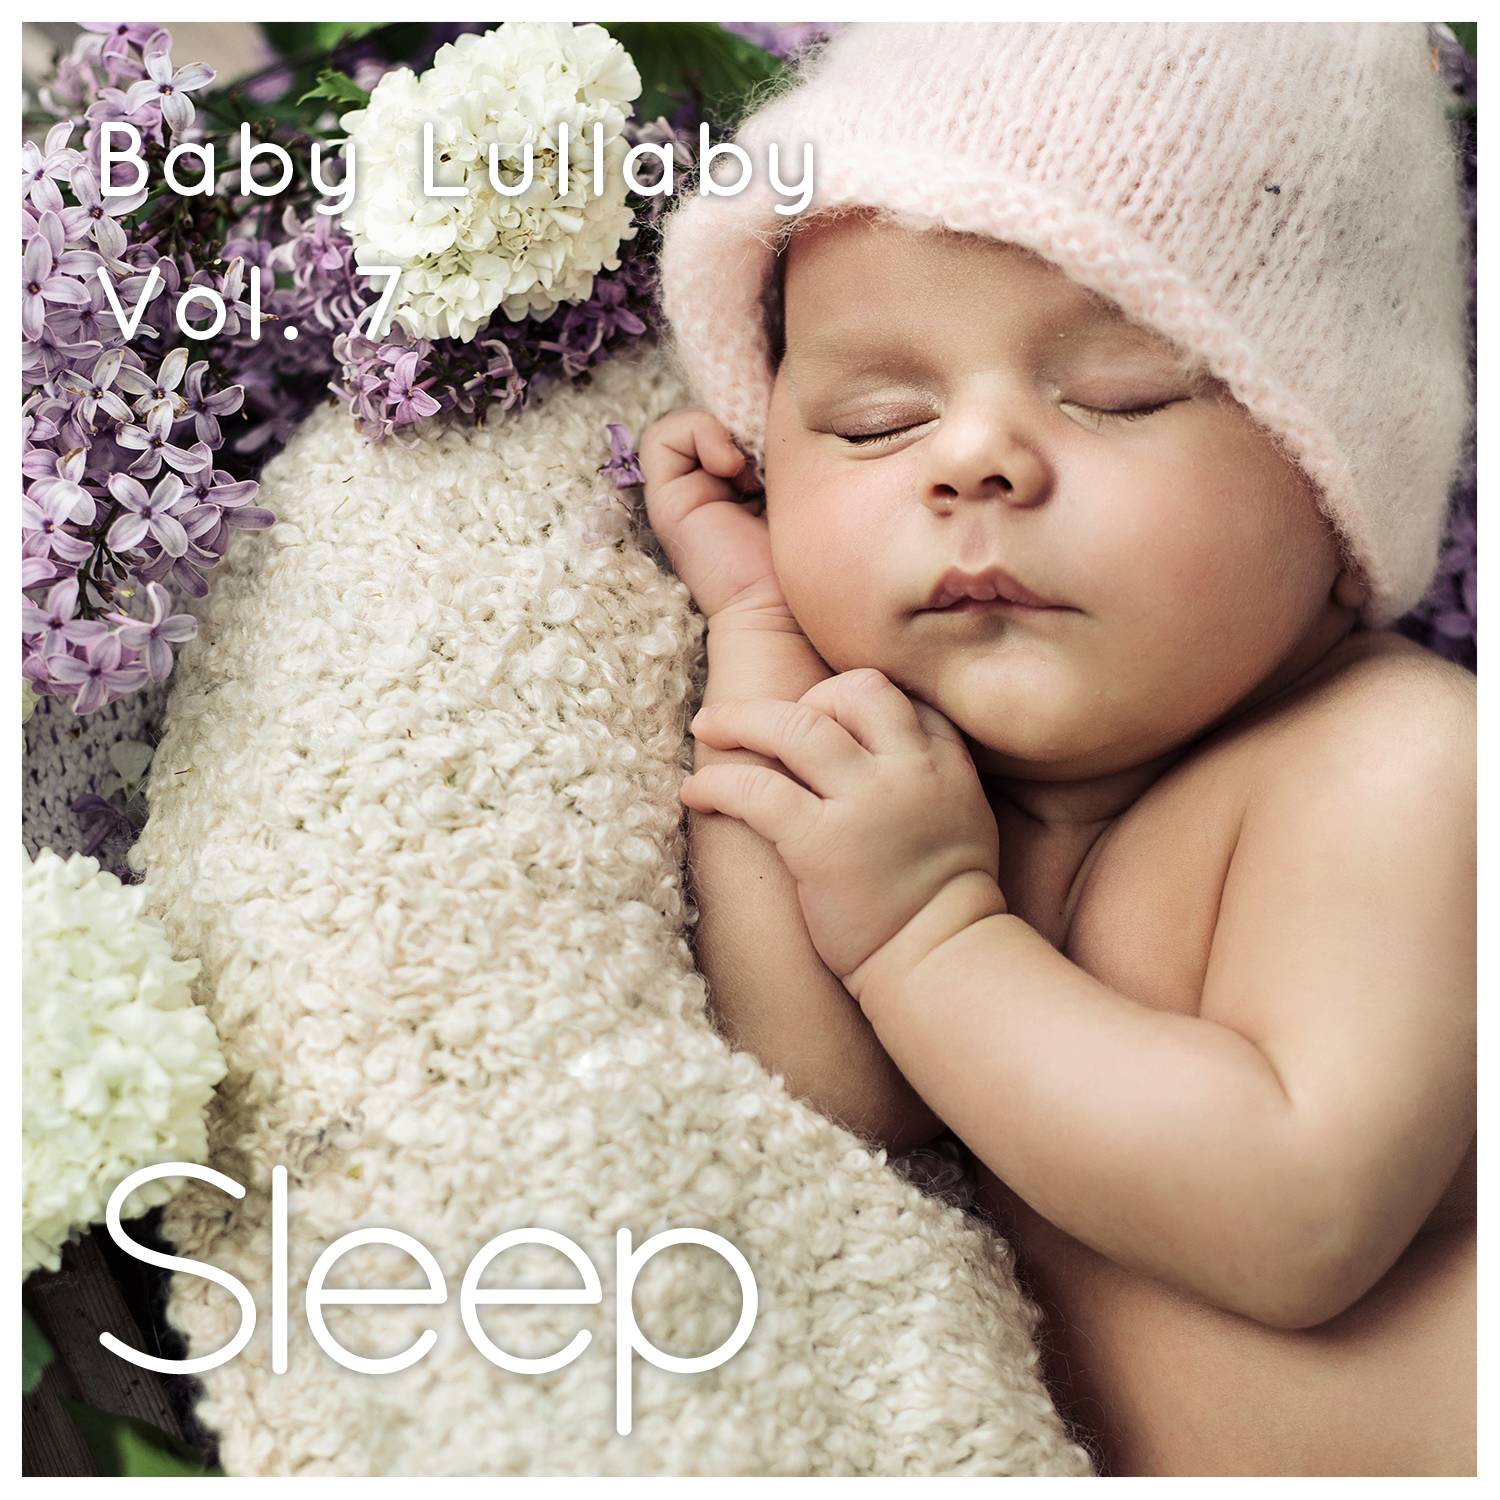 Baby Sleep Ambient Lullaby, Pt. 33